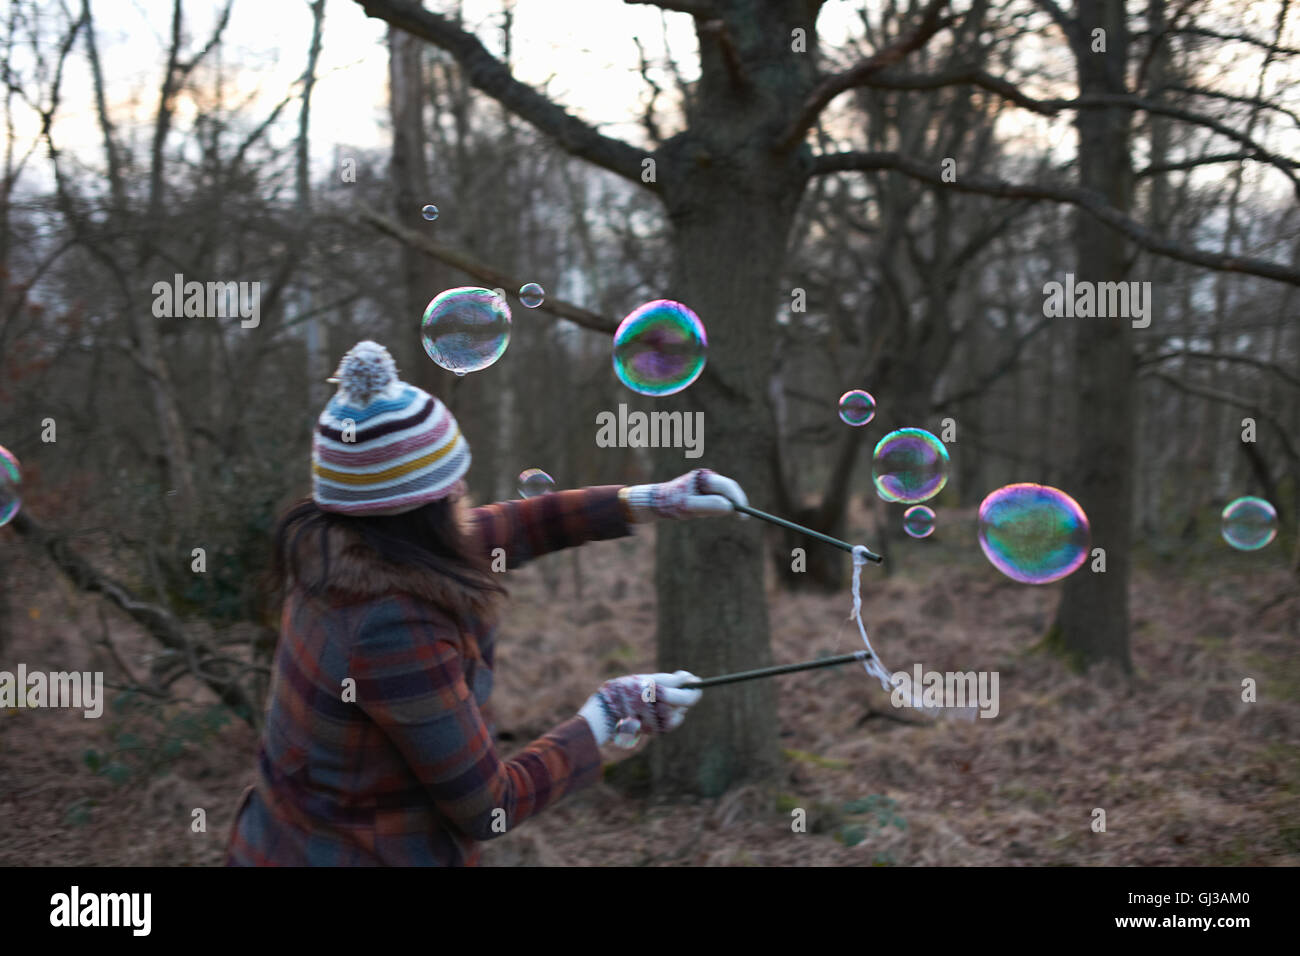 Woman in forest using bubble wands to make bubbles Stock Photo